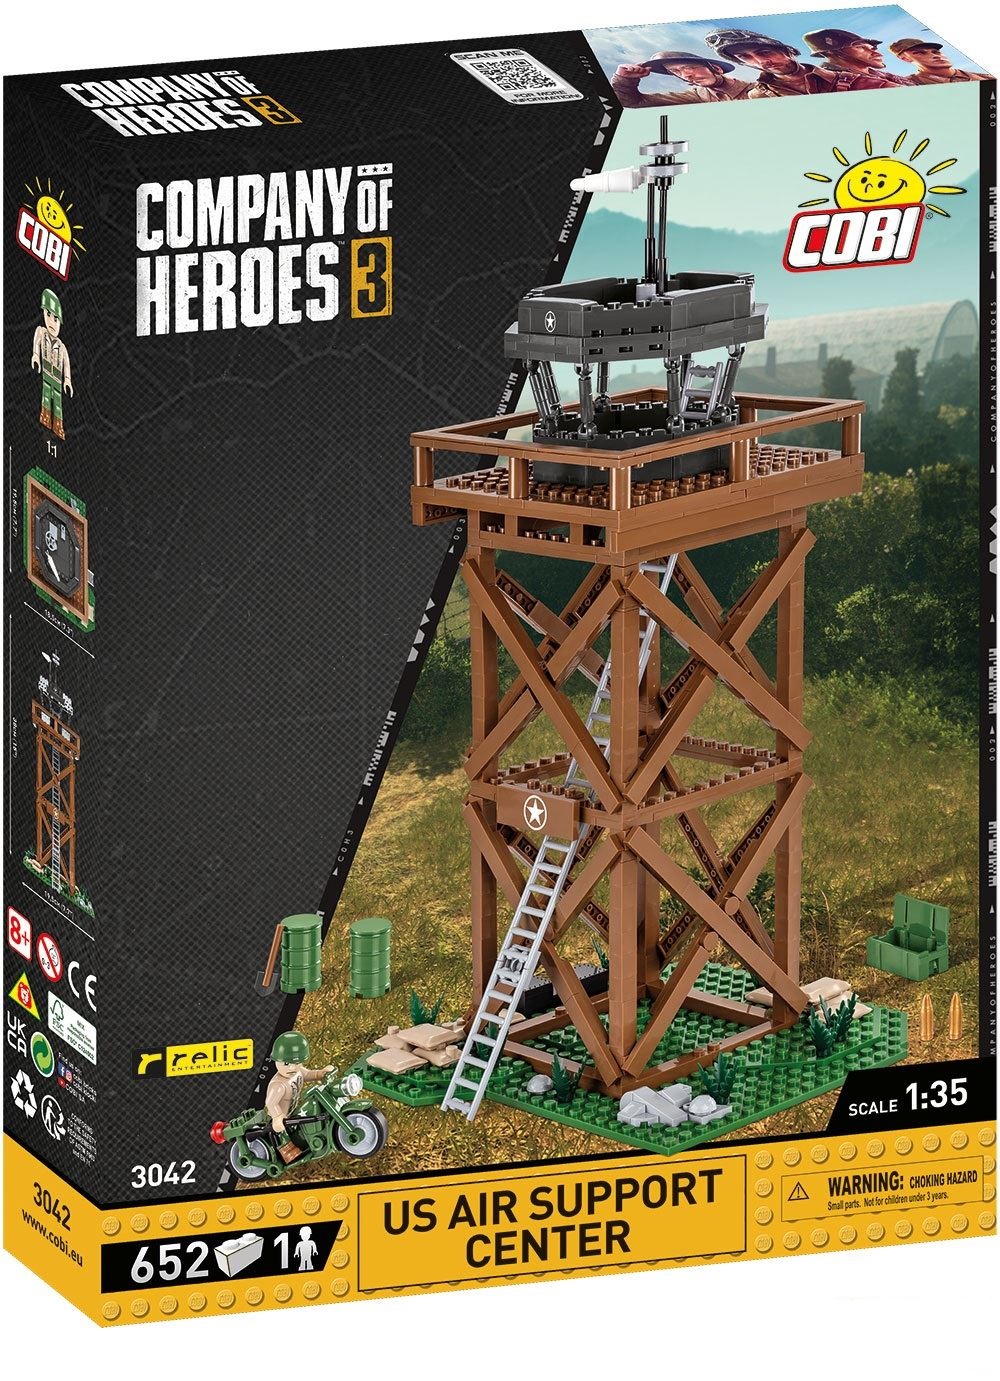 Cobi 3042 Company Of Heroes 3 - US Air Support Center, 652k, 1f